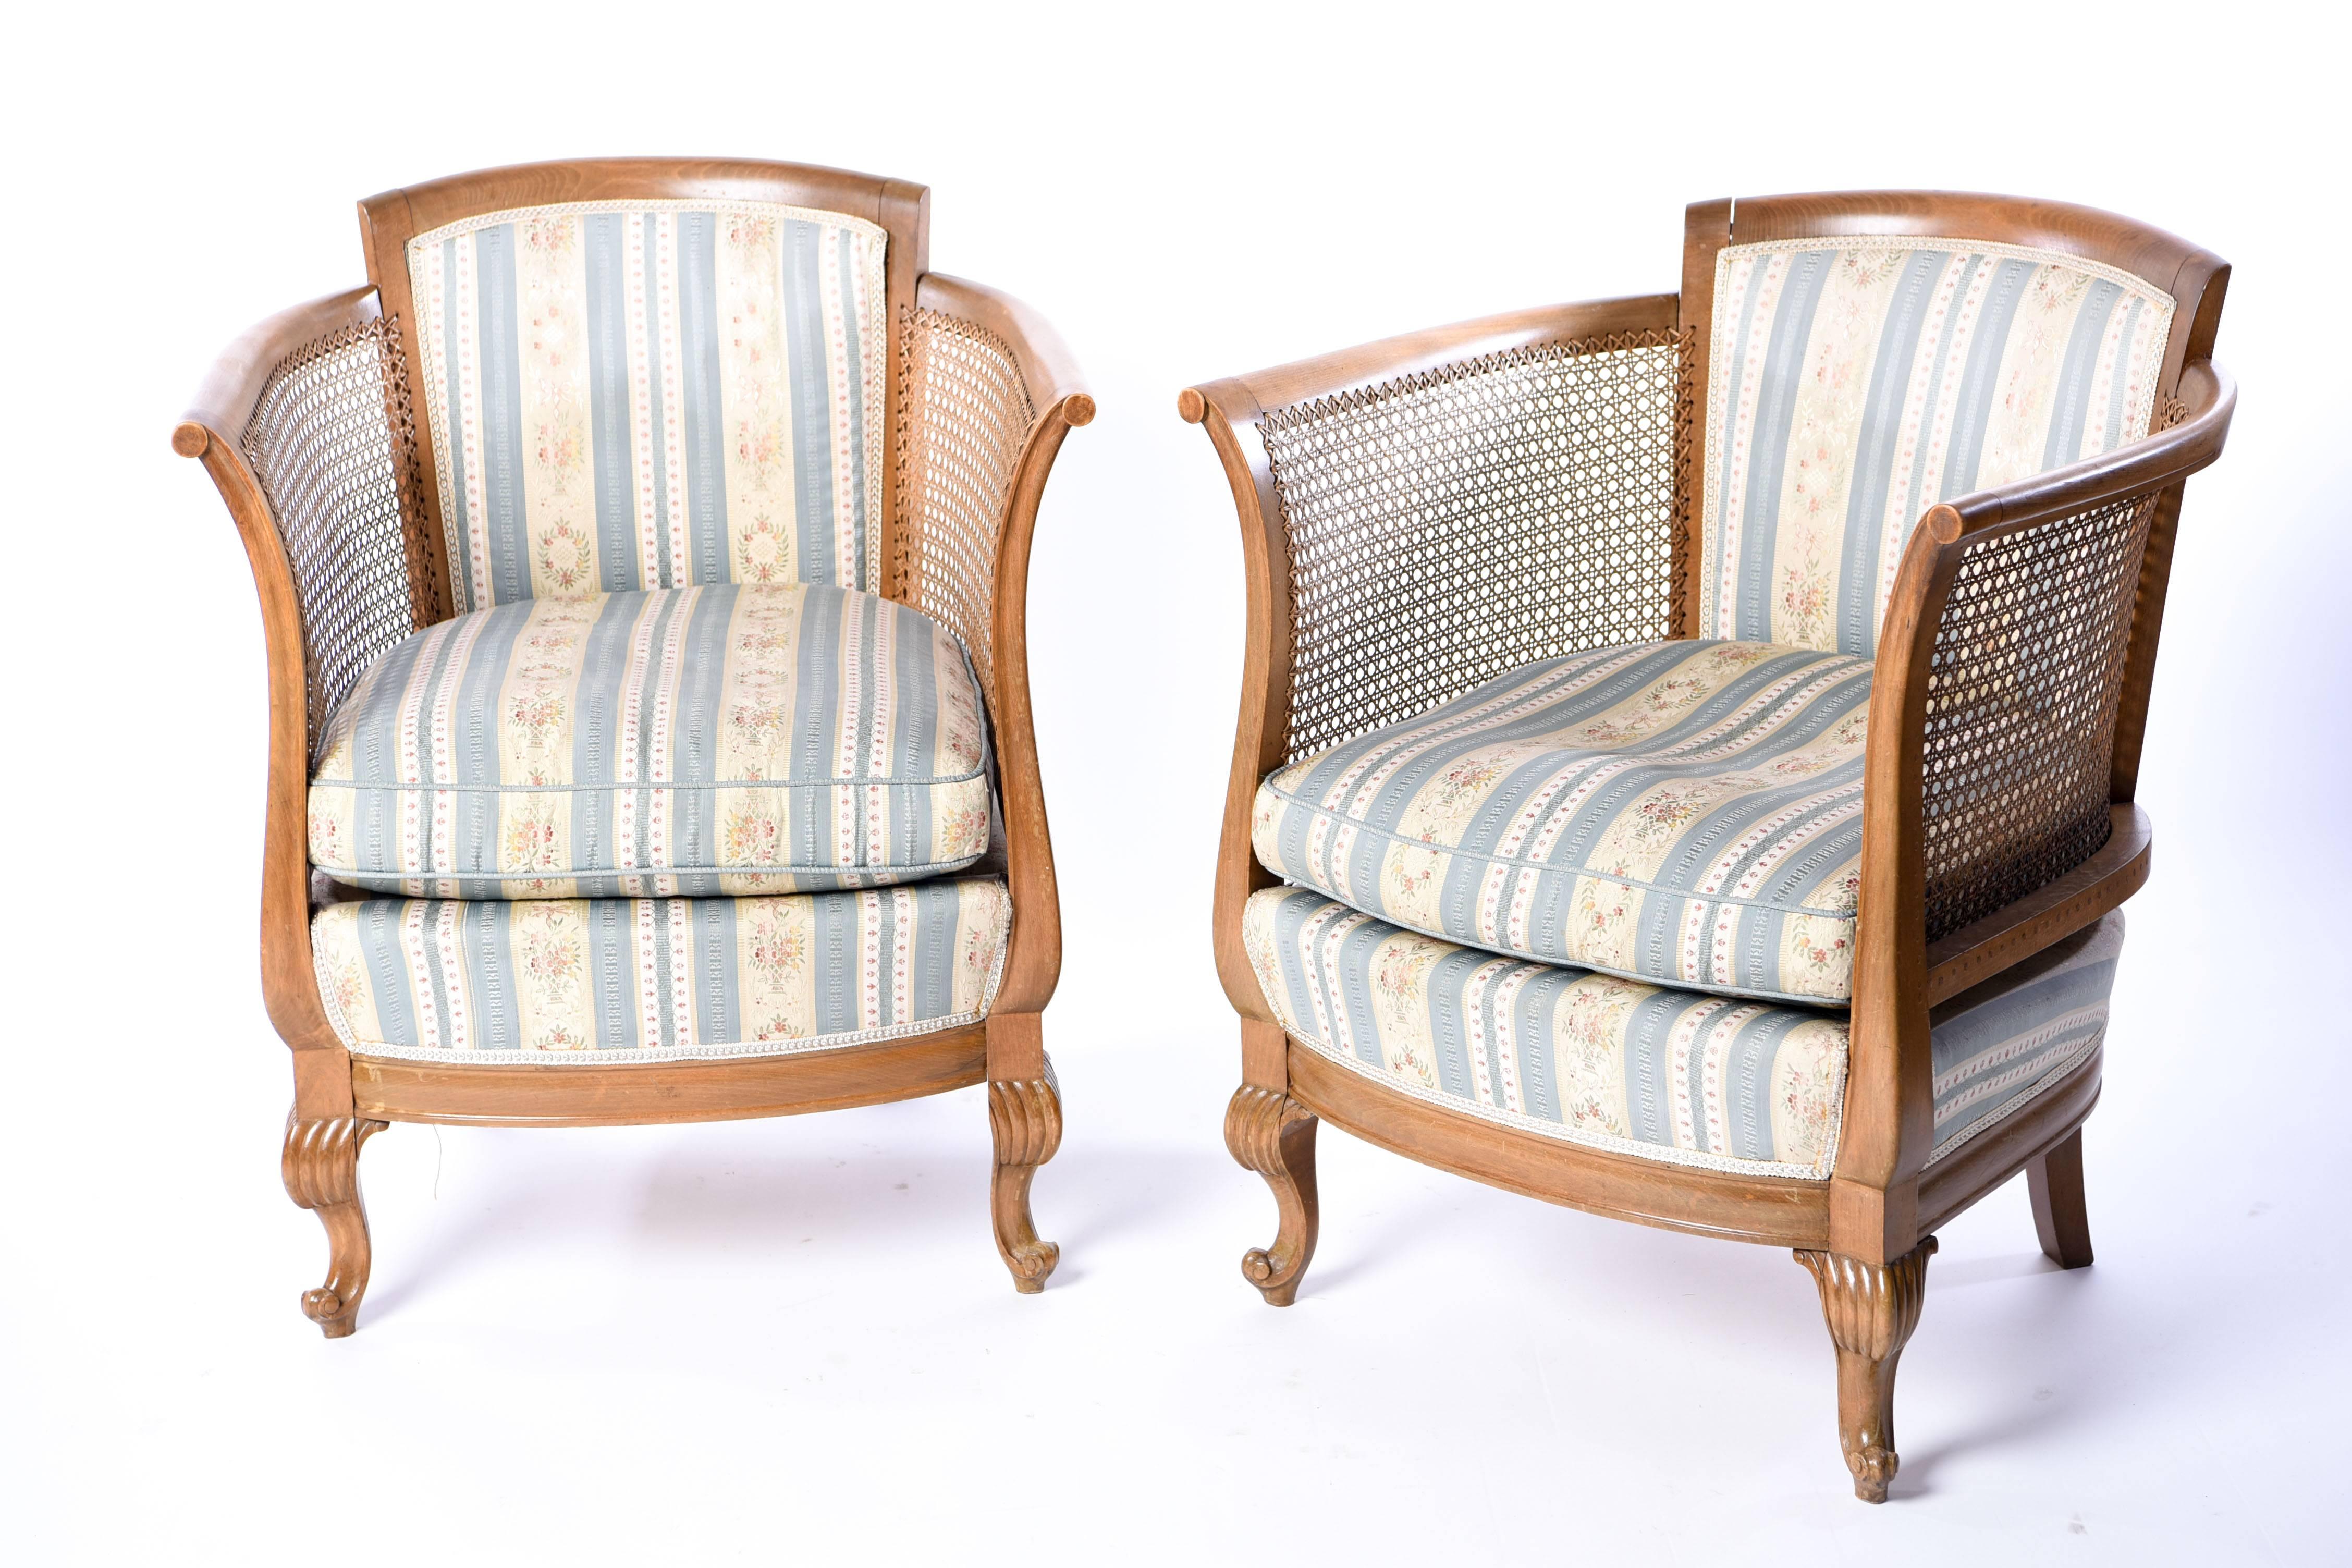 This pair of French bergere armchairs features upholstered seats and backs with curved caned sides. Beautiful ribbed design on the Rococo style legs.